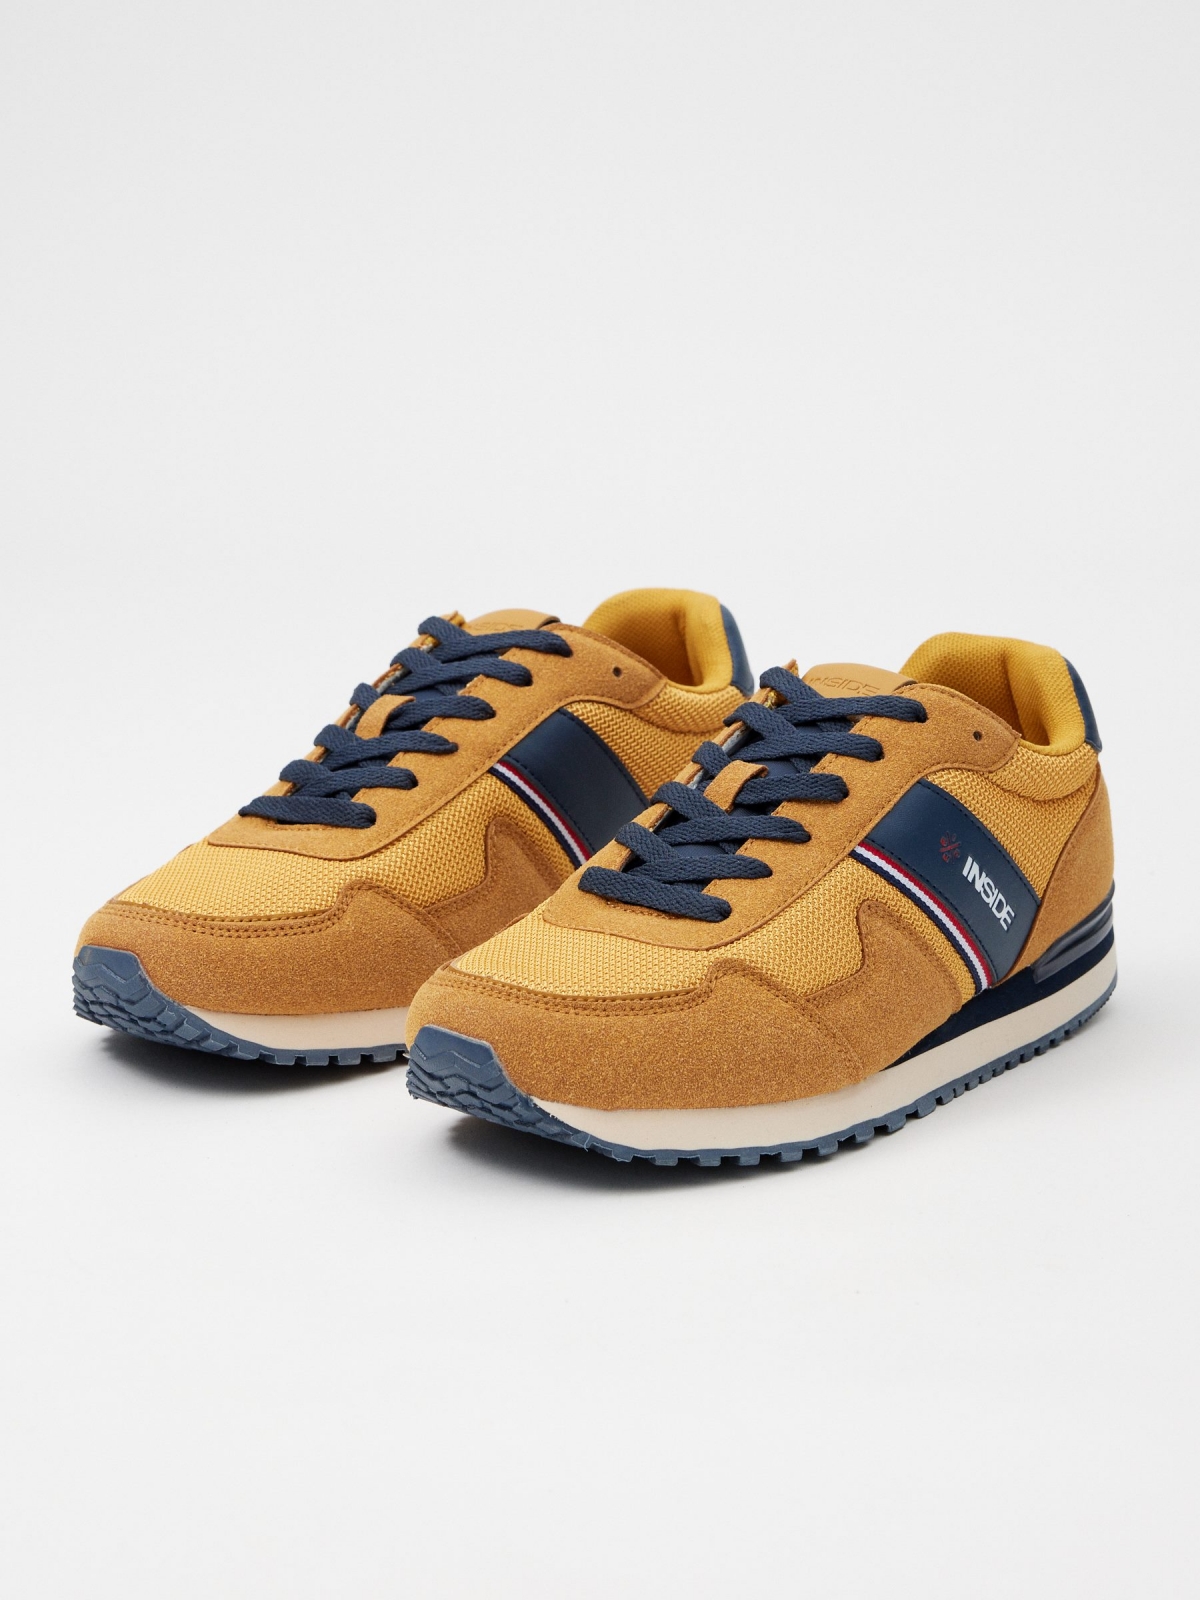 Nylon casual sneaker yellow 45º front view